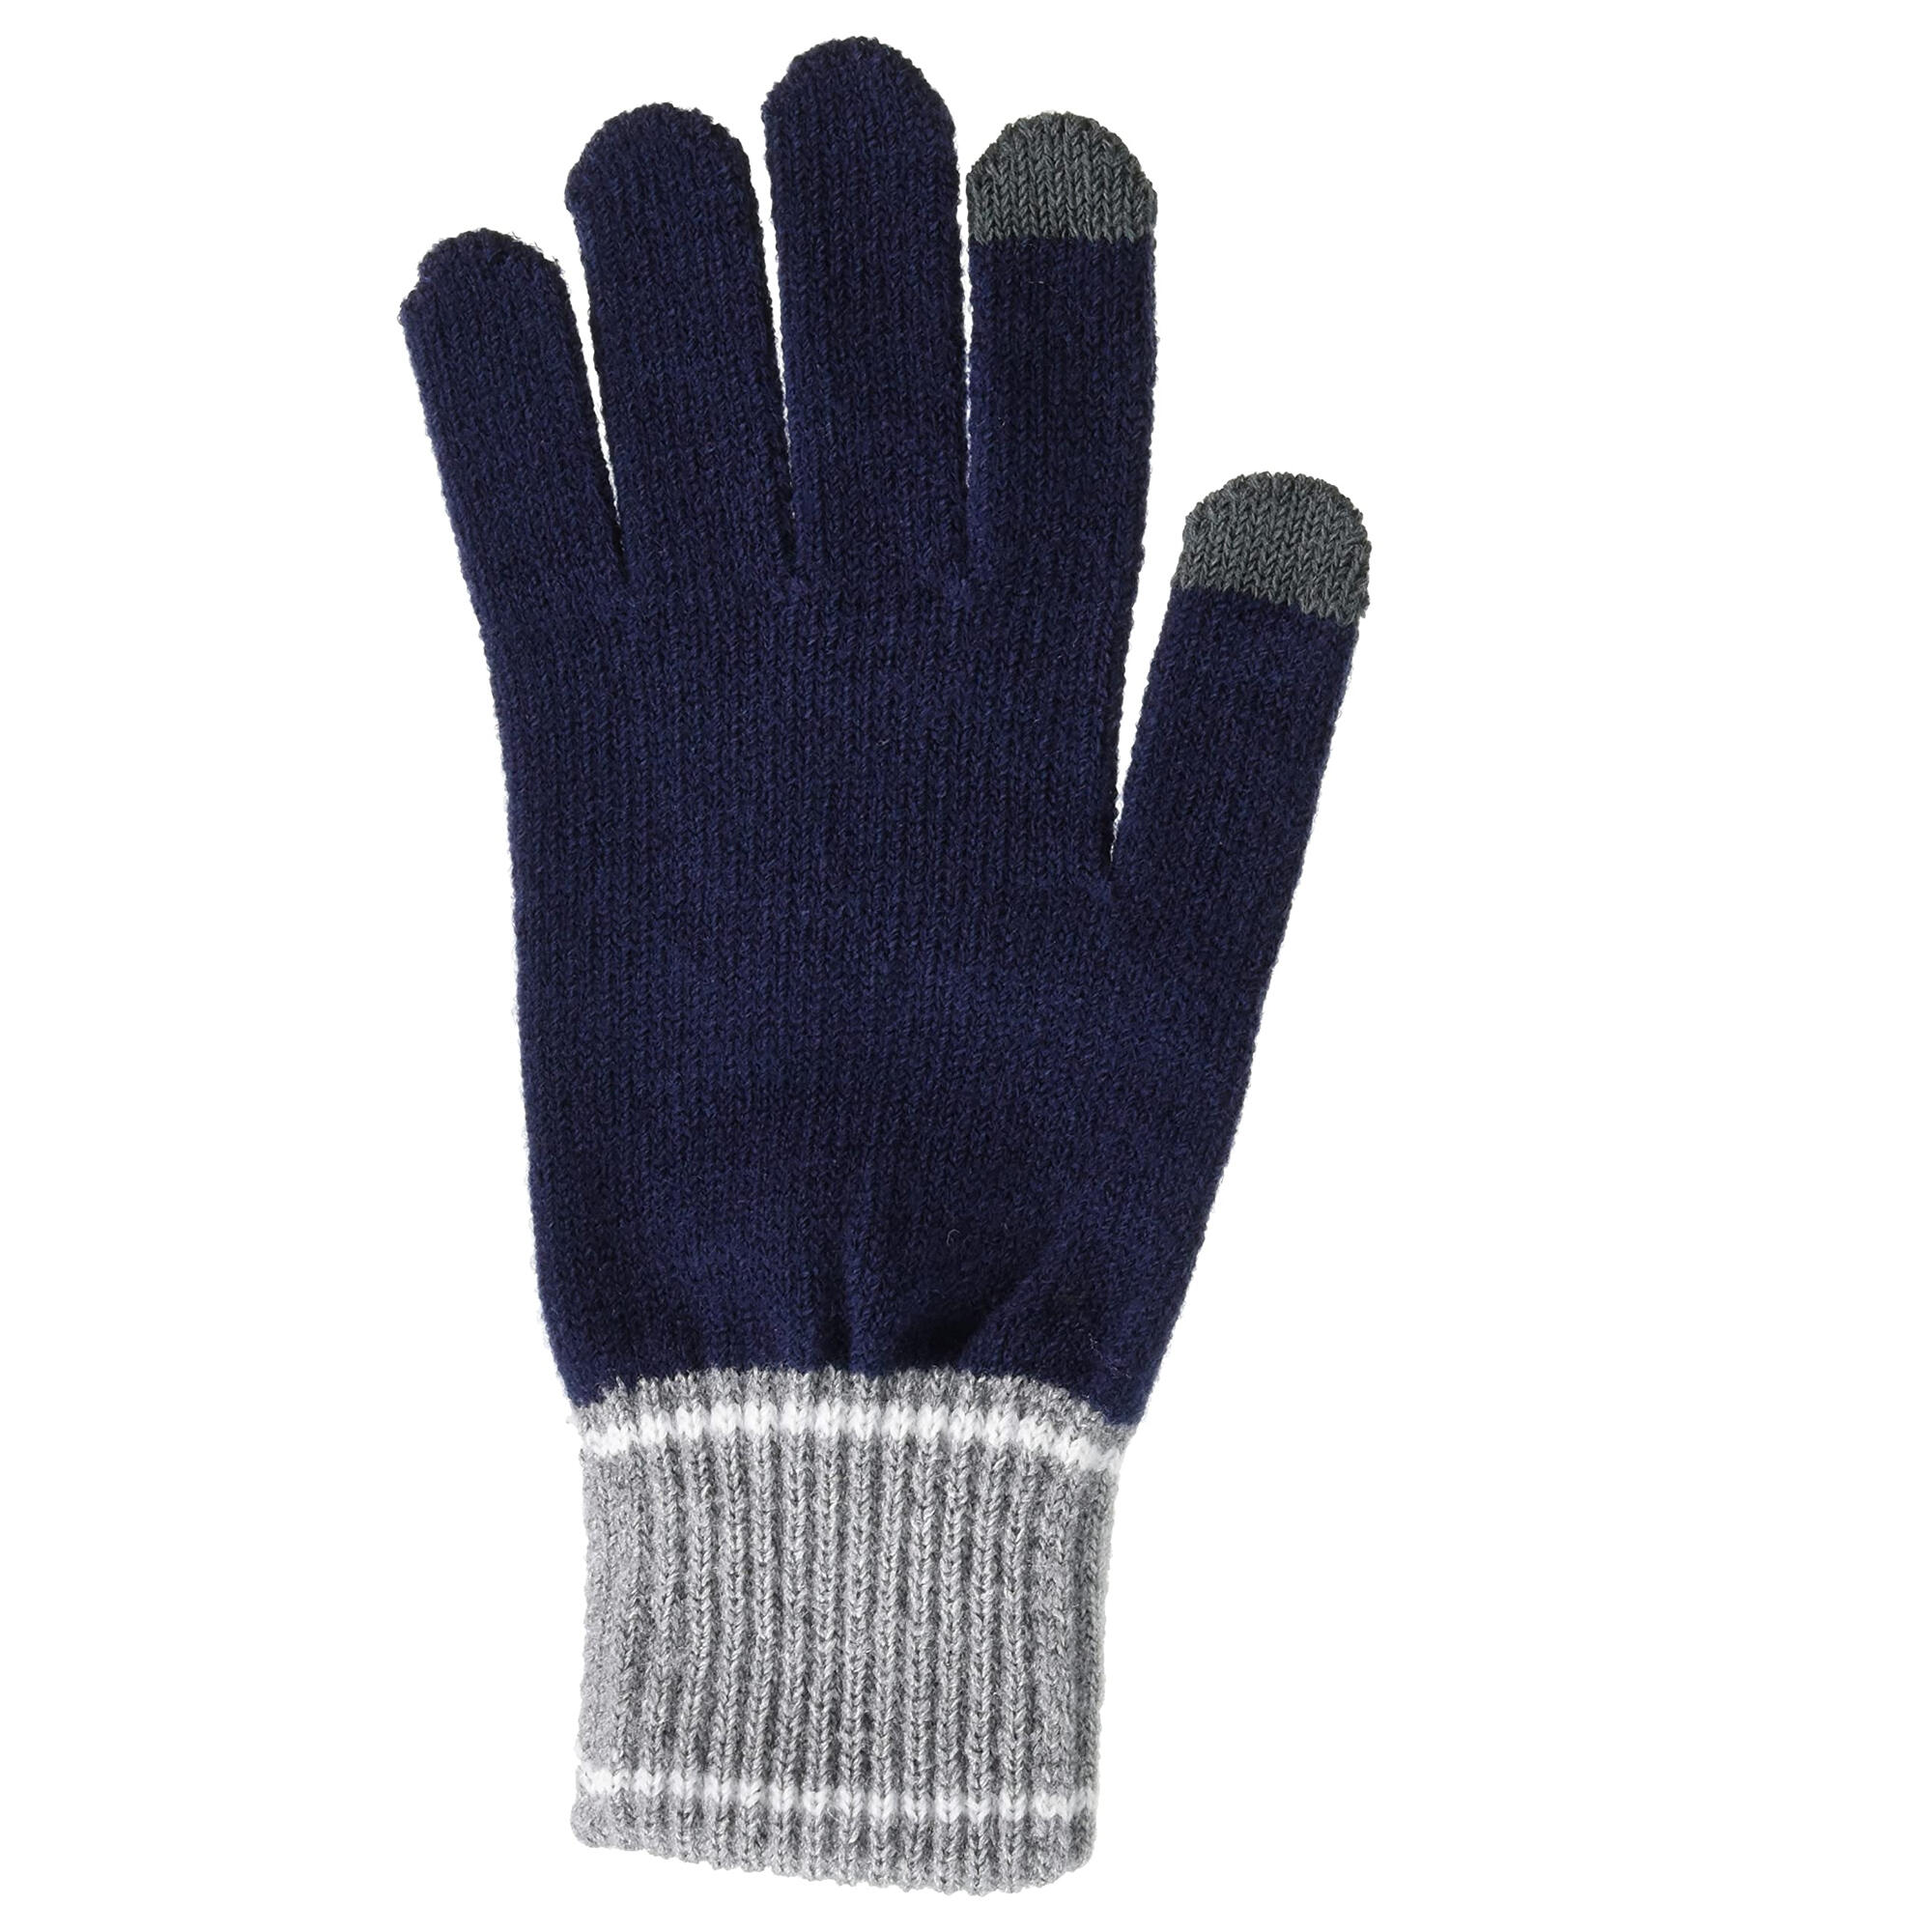 Unisex Adult Knitted Winter Gloves (Peacoat/Grey Heather) 2/3